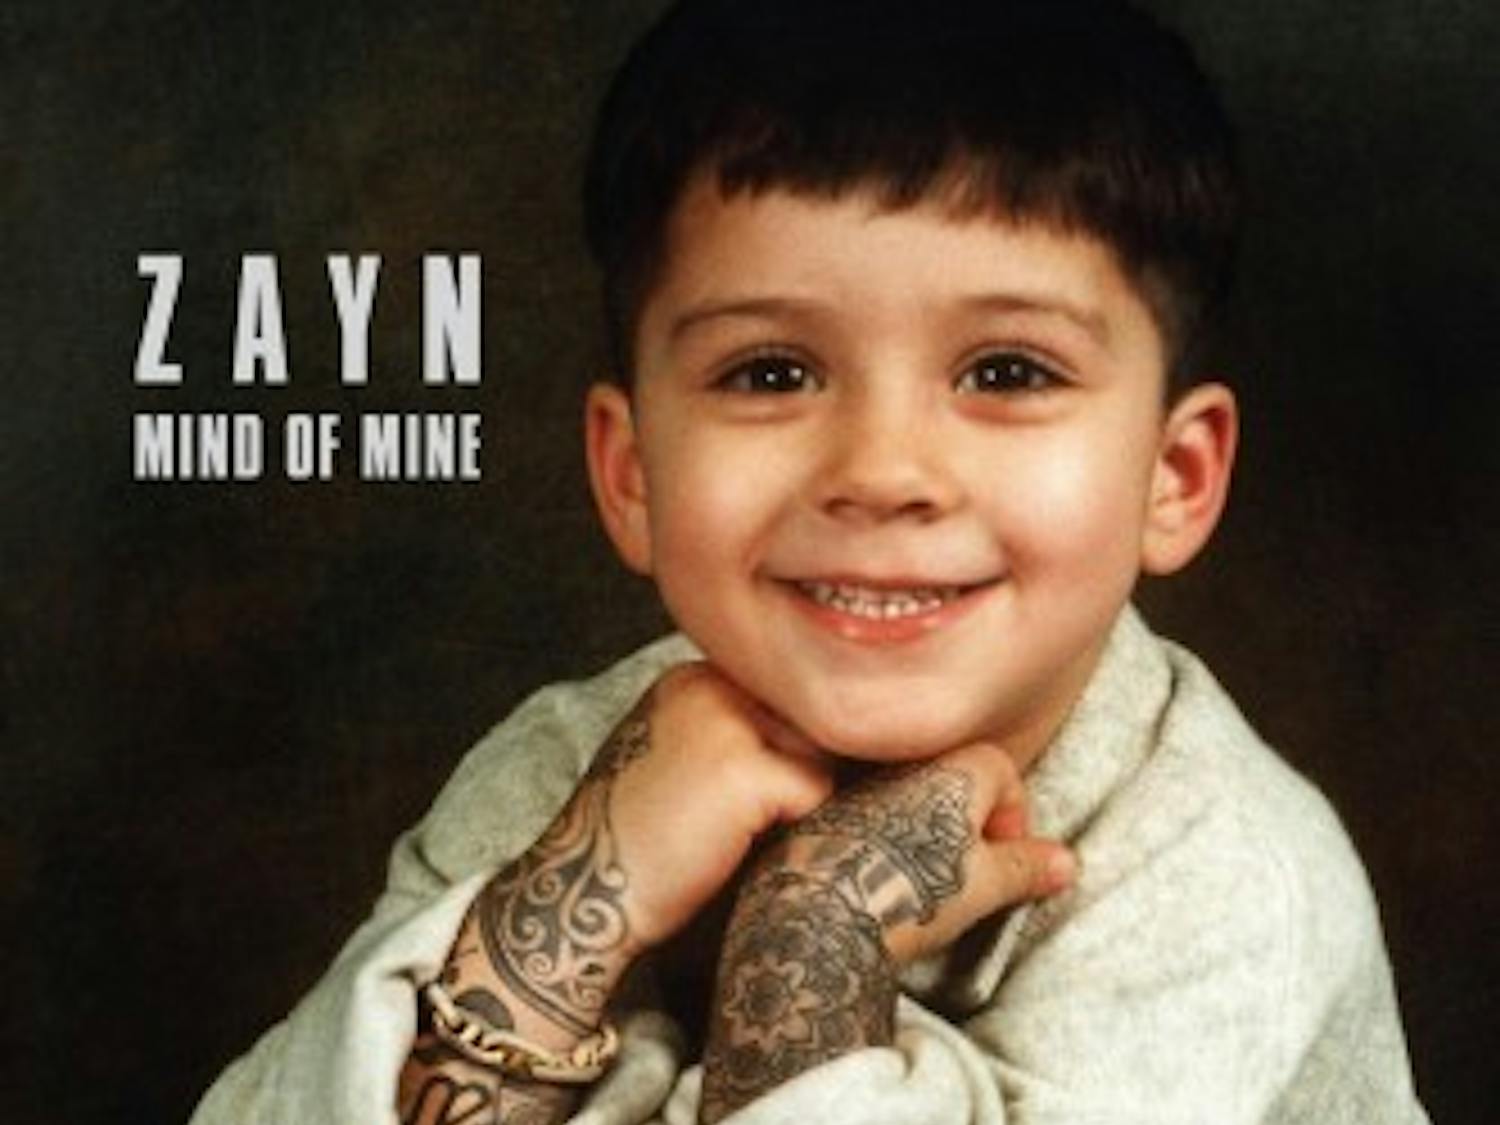 Zayn Malik's new album is his first solo body of work and has an edgy, adult image that is new for the former boy band star.